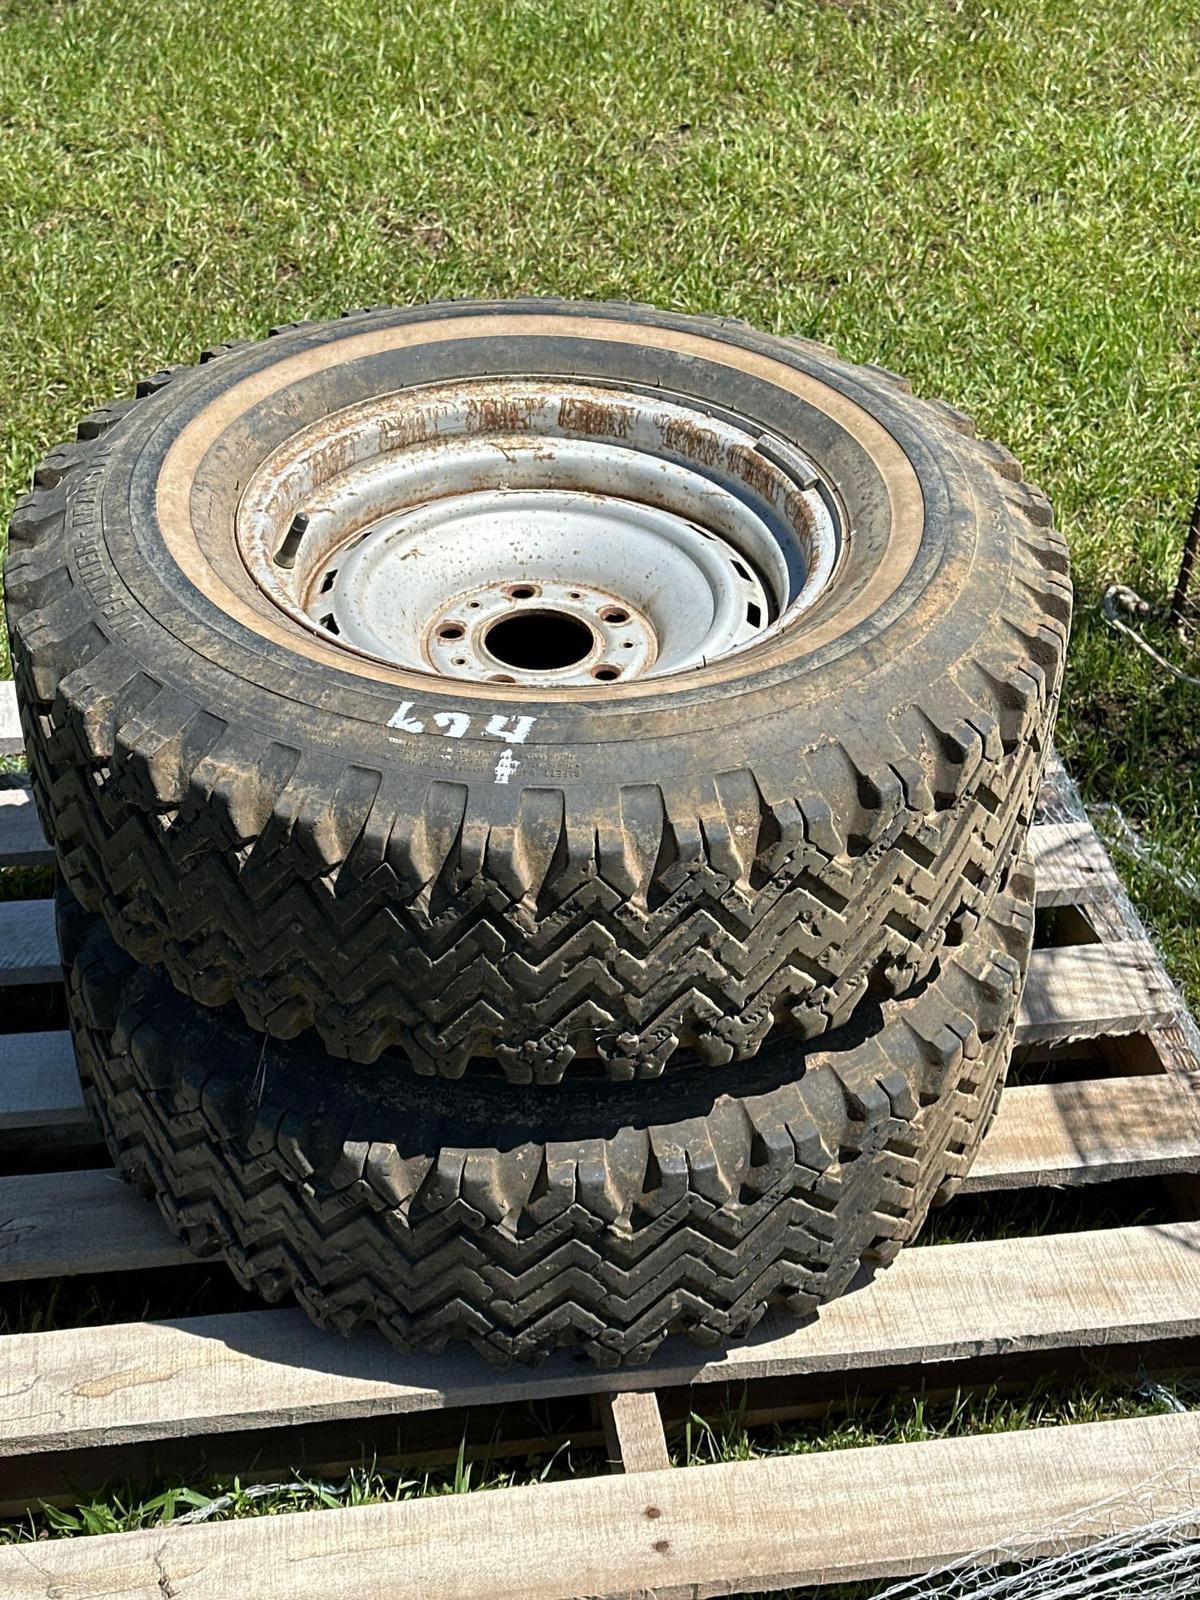 Lot of 2 L 78?15 mud and snow tires on 15 inch five hole Chevrolet rims